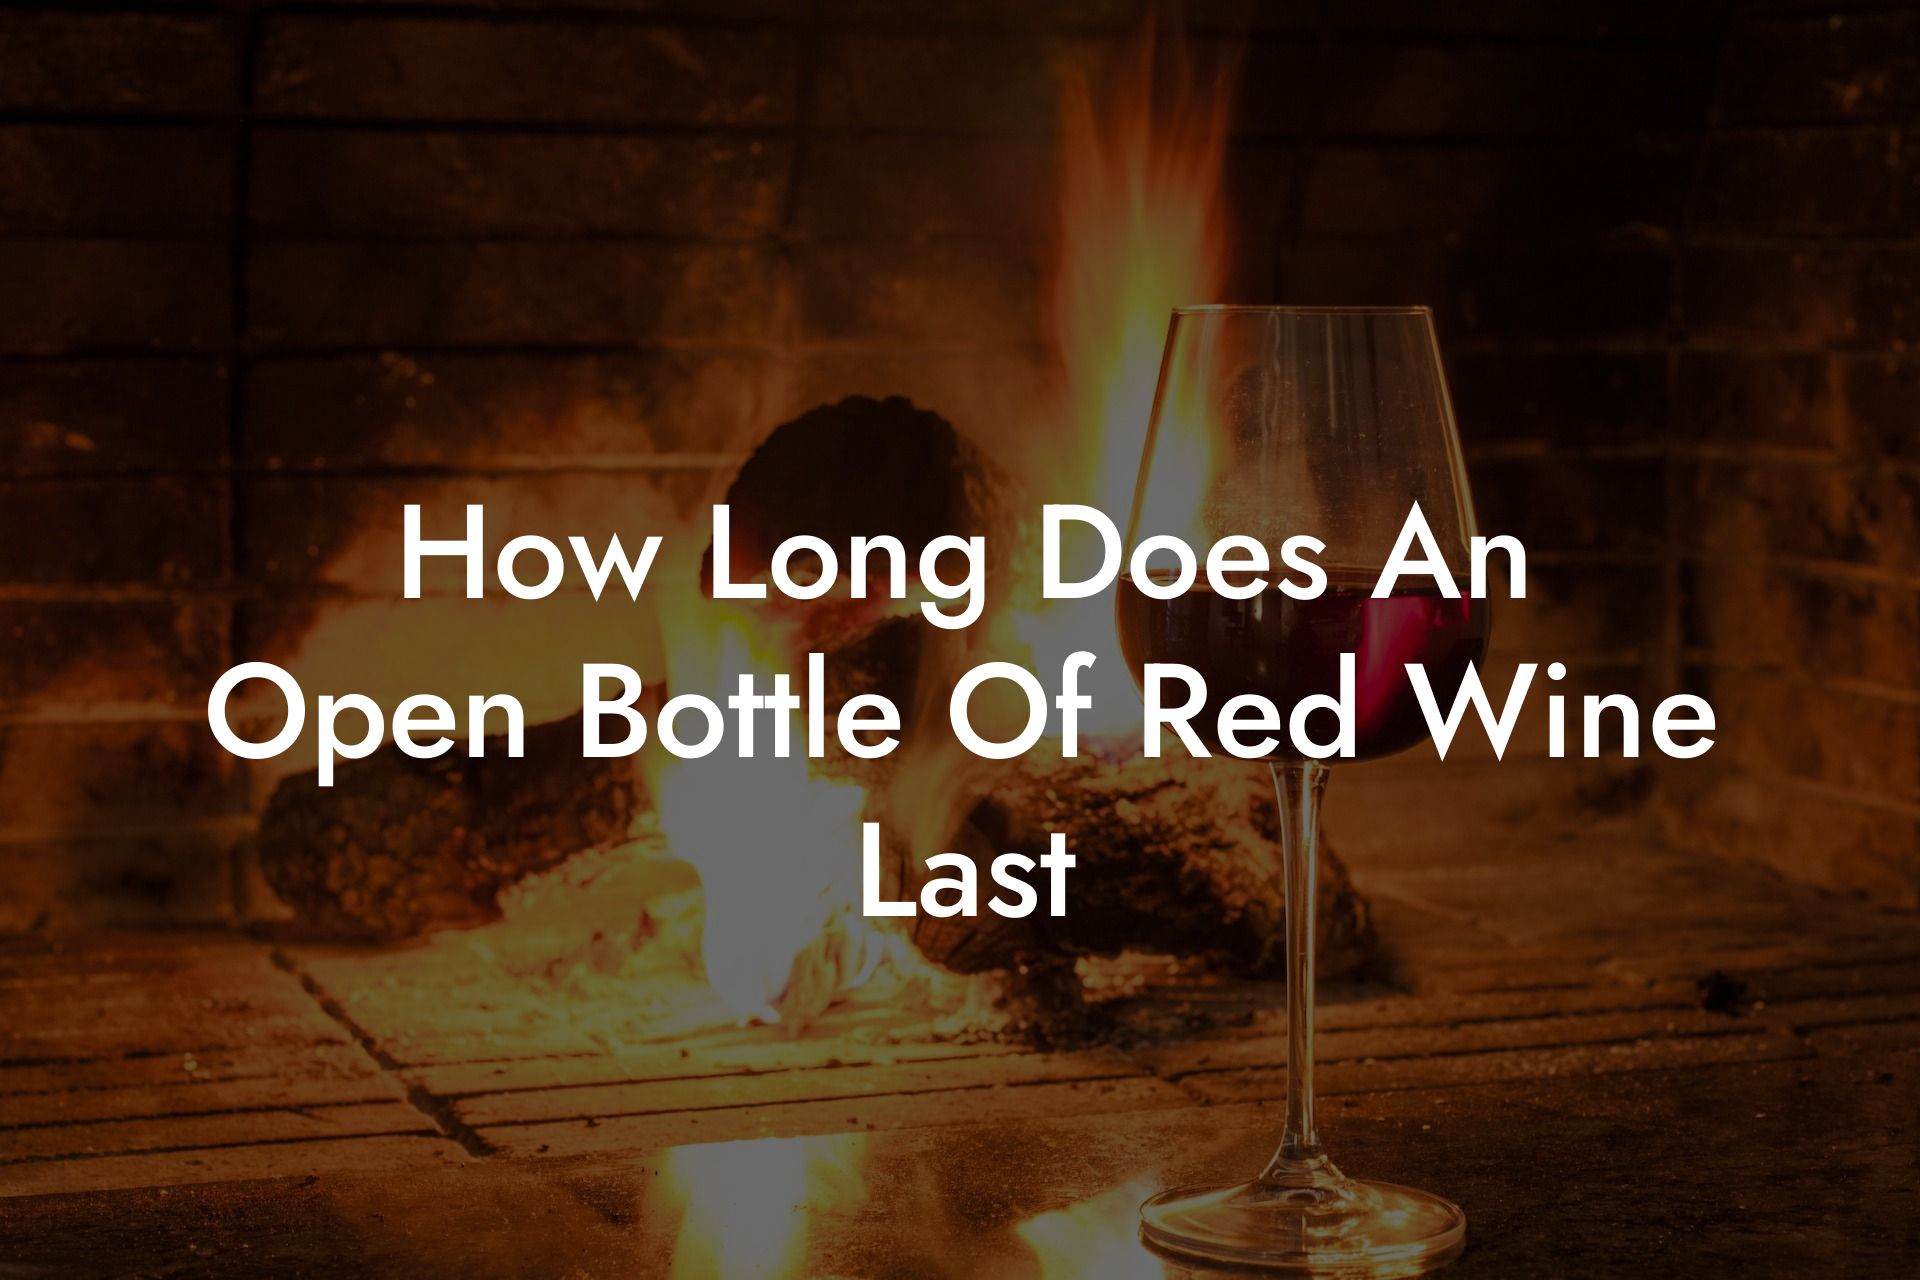 How Long Does An Open Bottle Of Red Wine Last